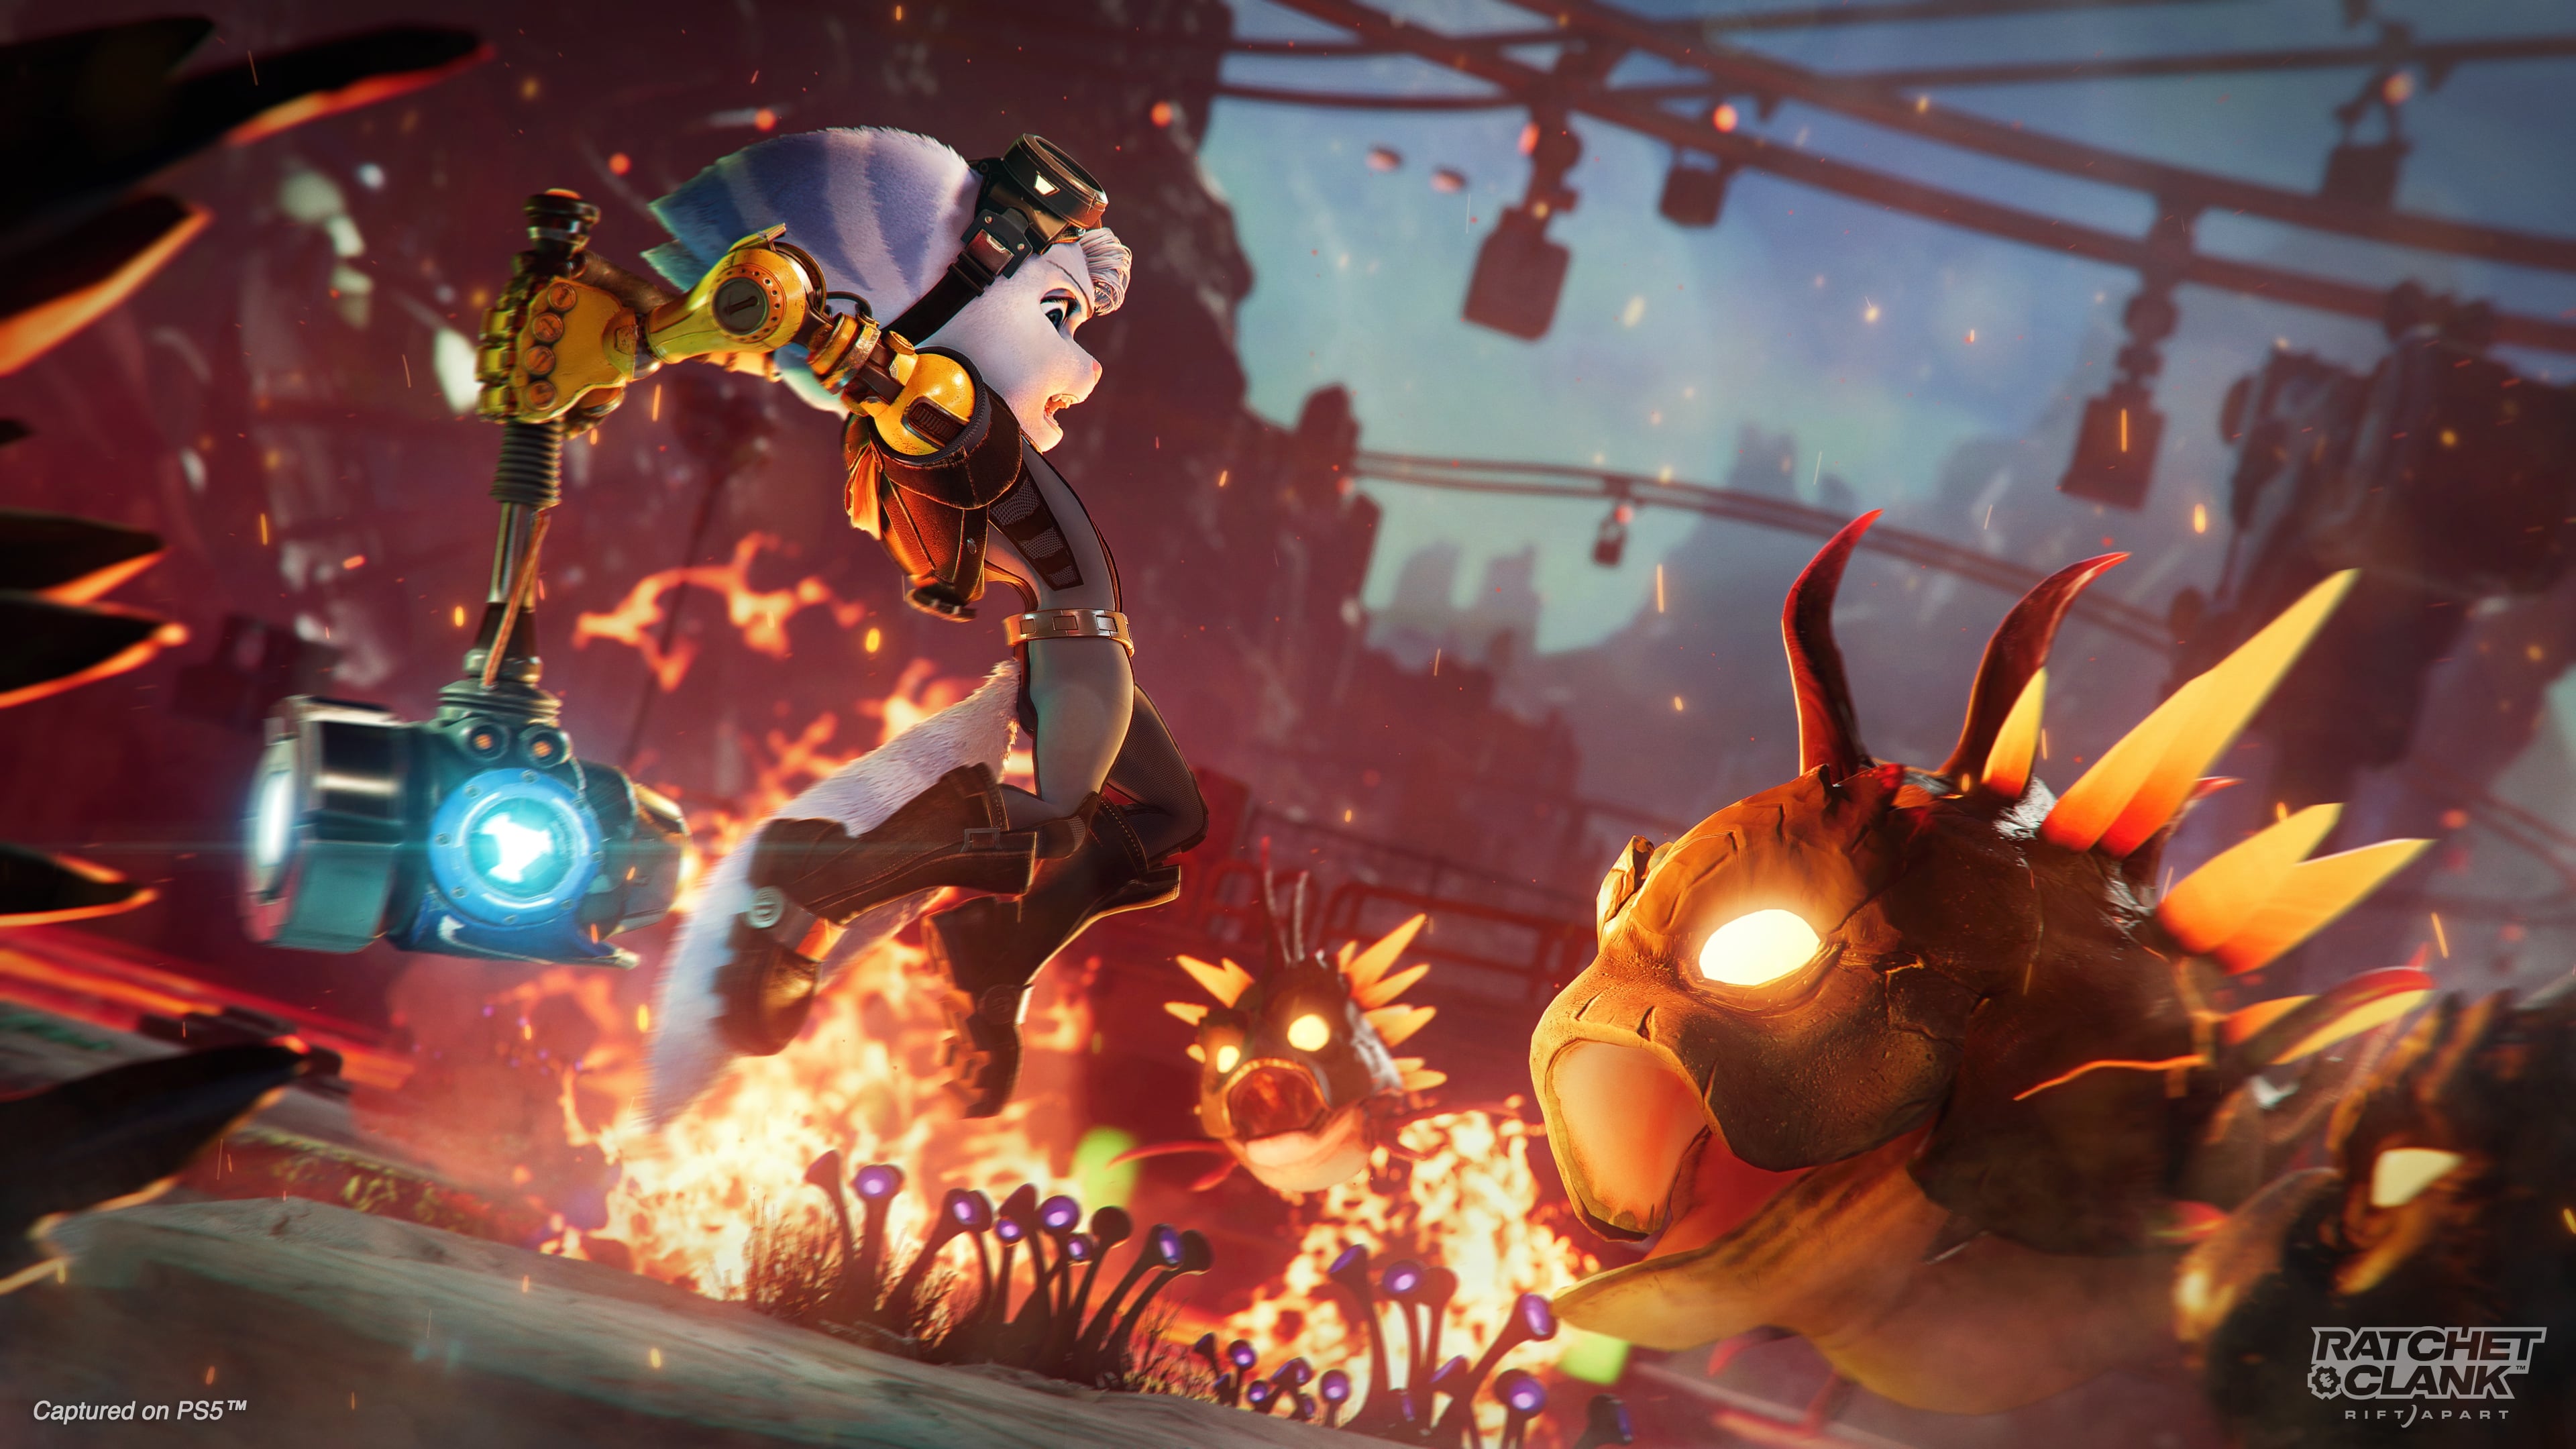 Ratchet & Clank: Rift Apart Update 1.922 for Sep. 25 Includes Improvements